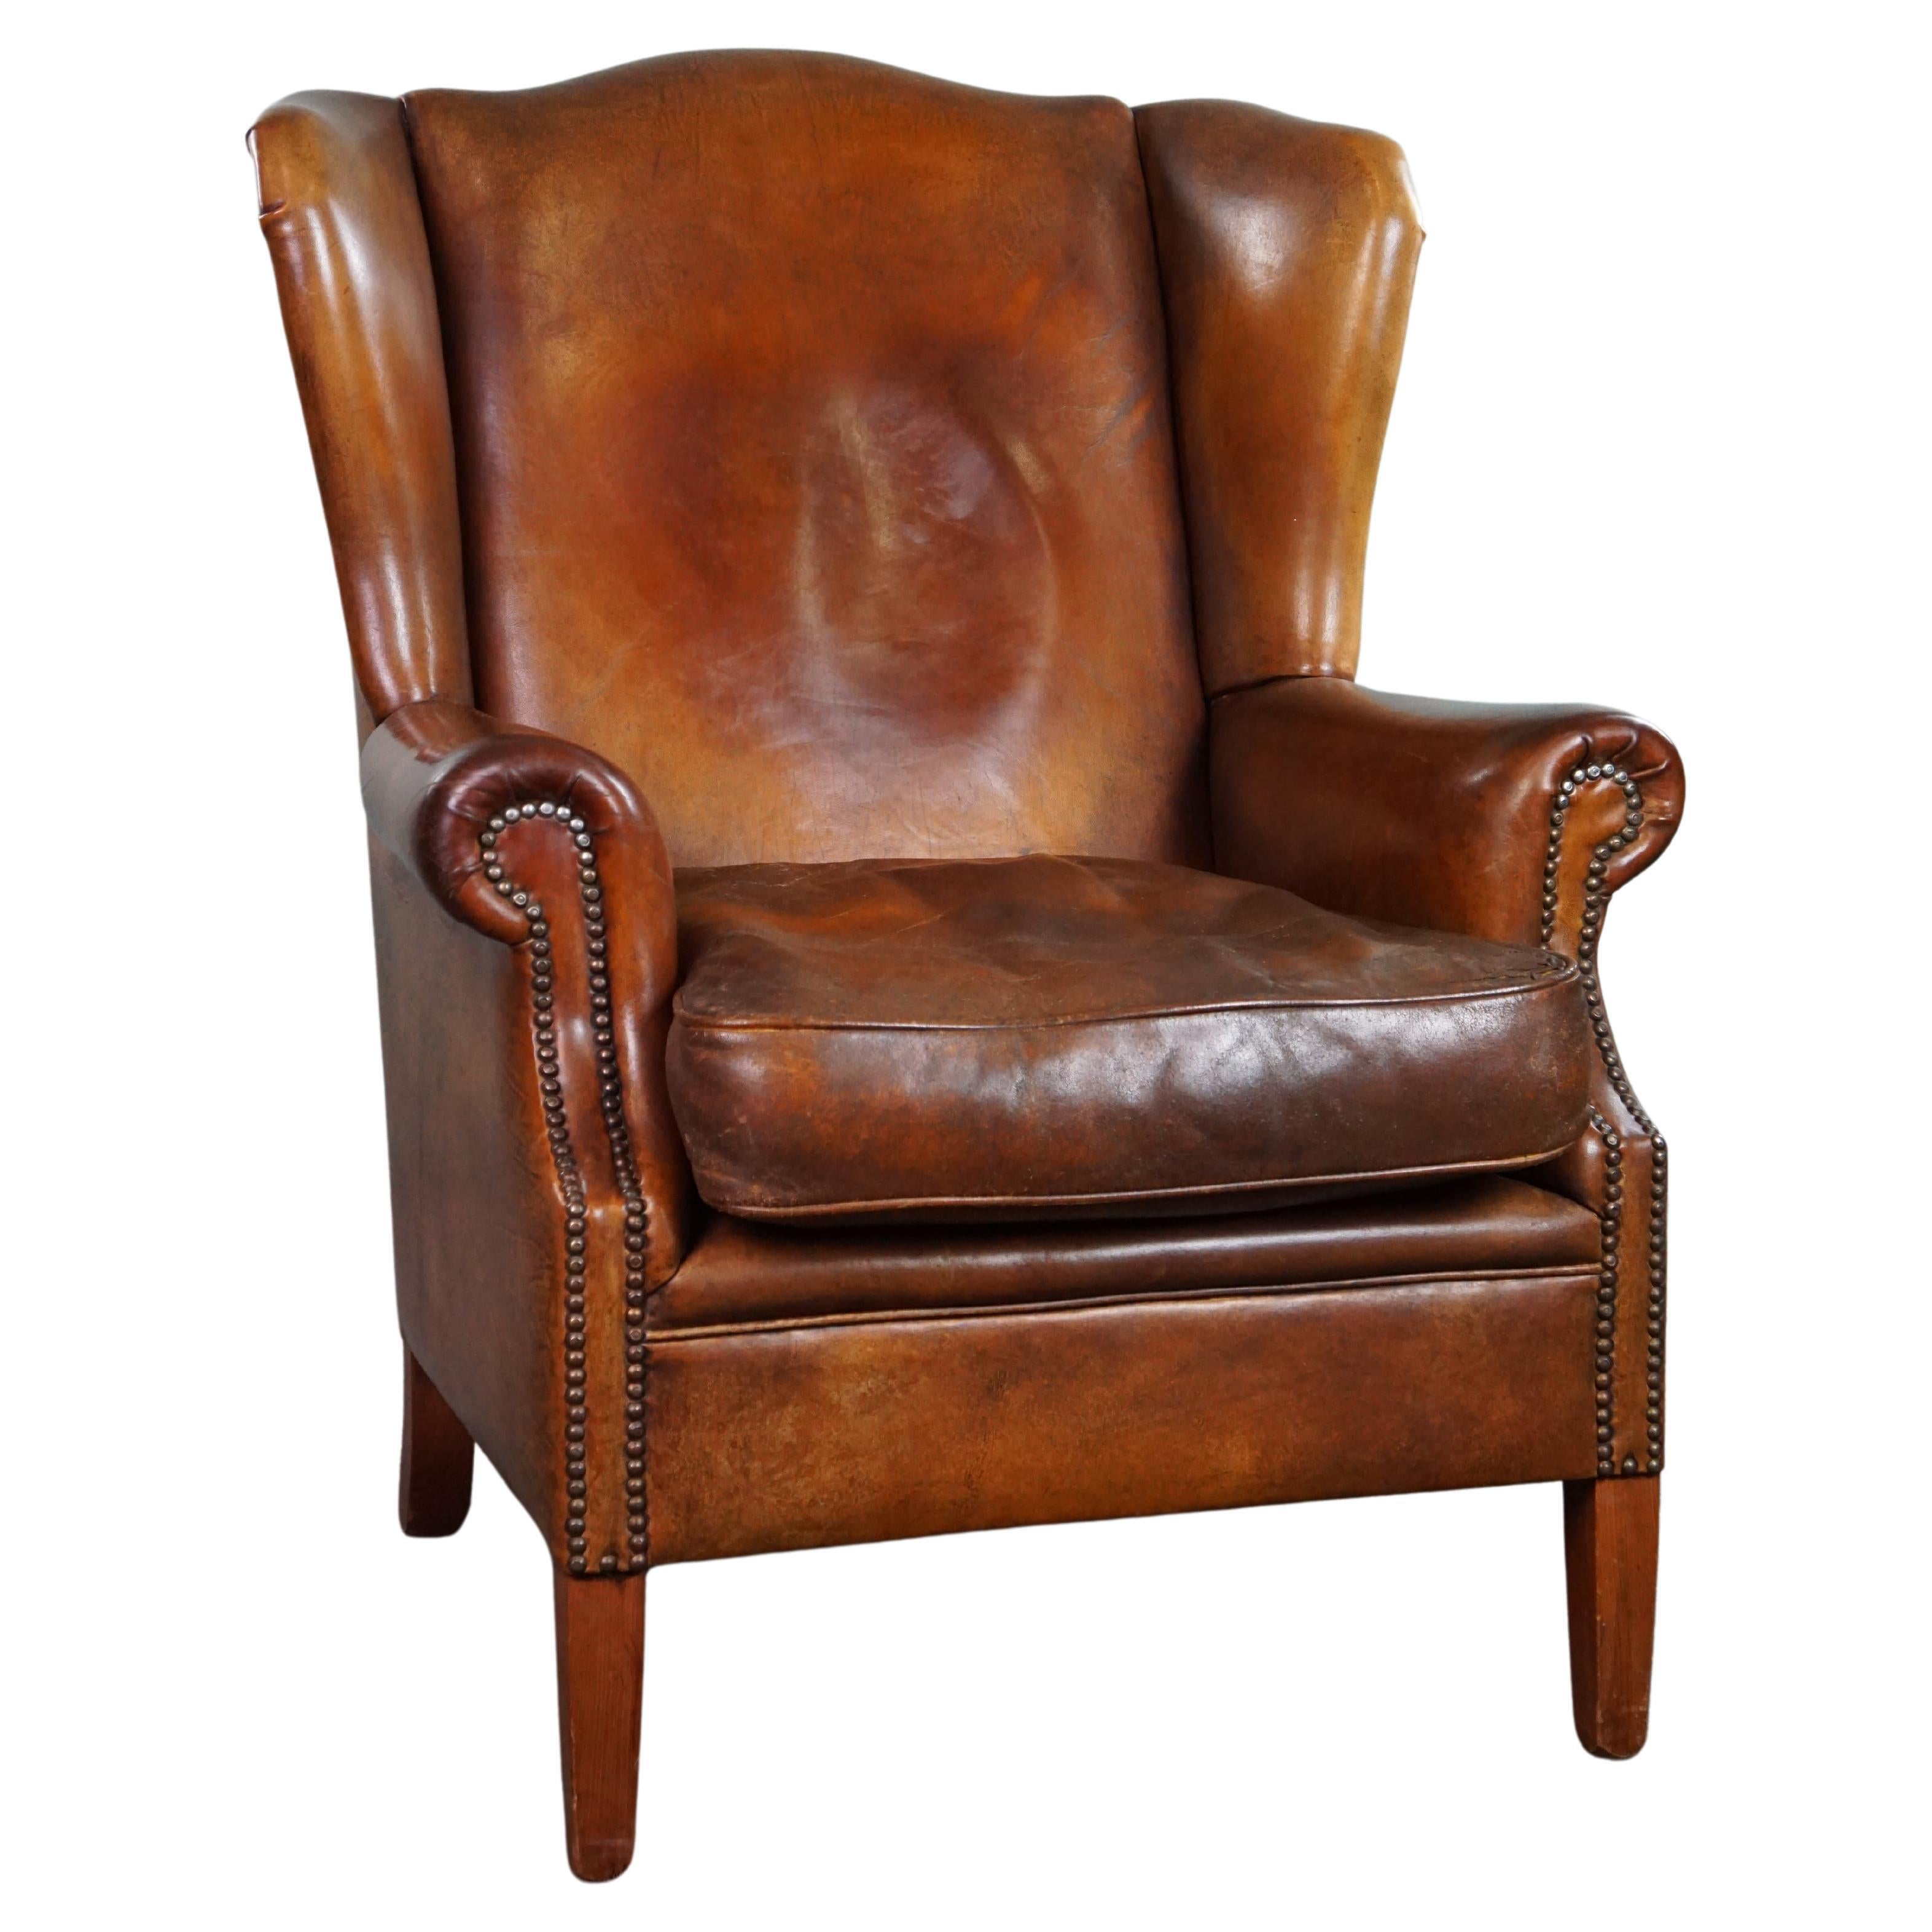 Very rugged wingback armchair made of cognac-colored sheep leather